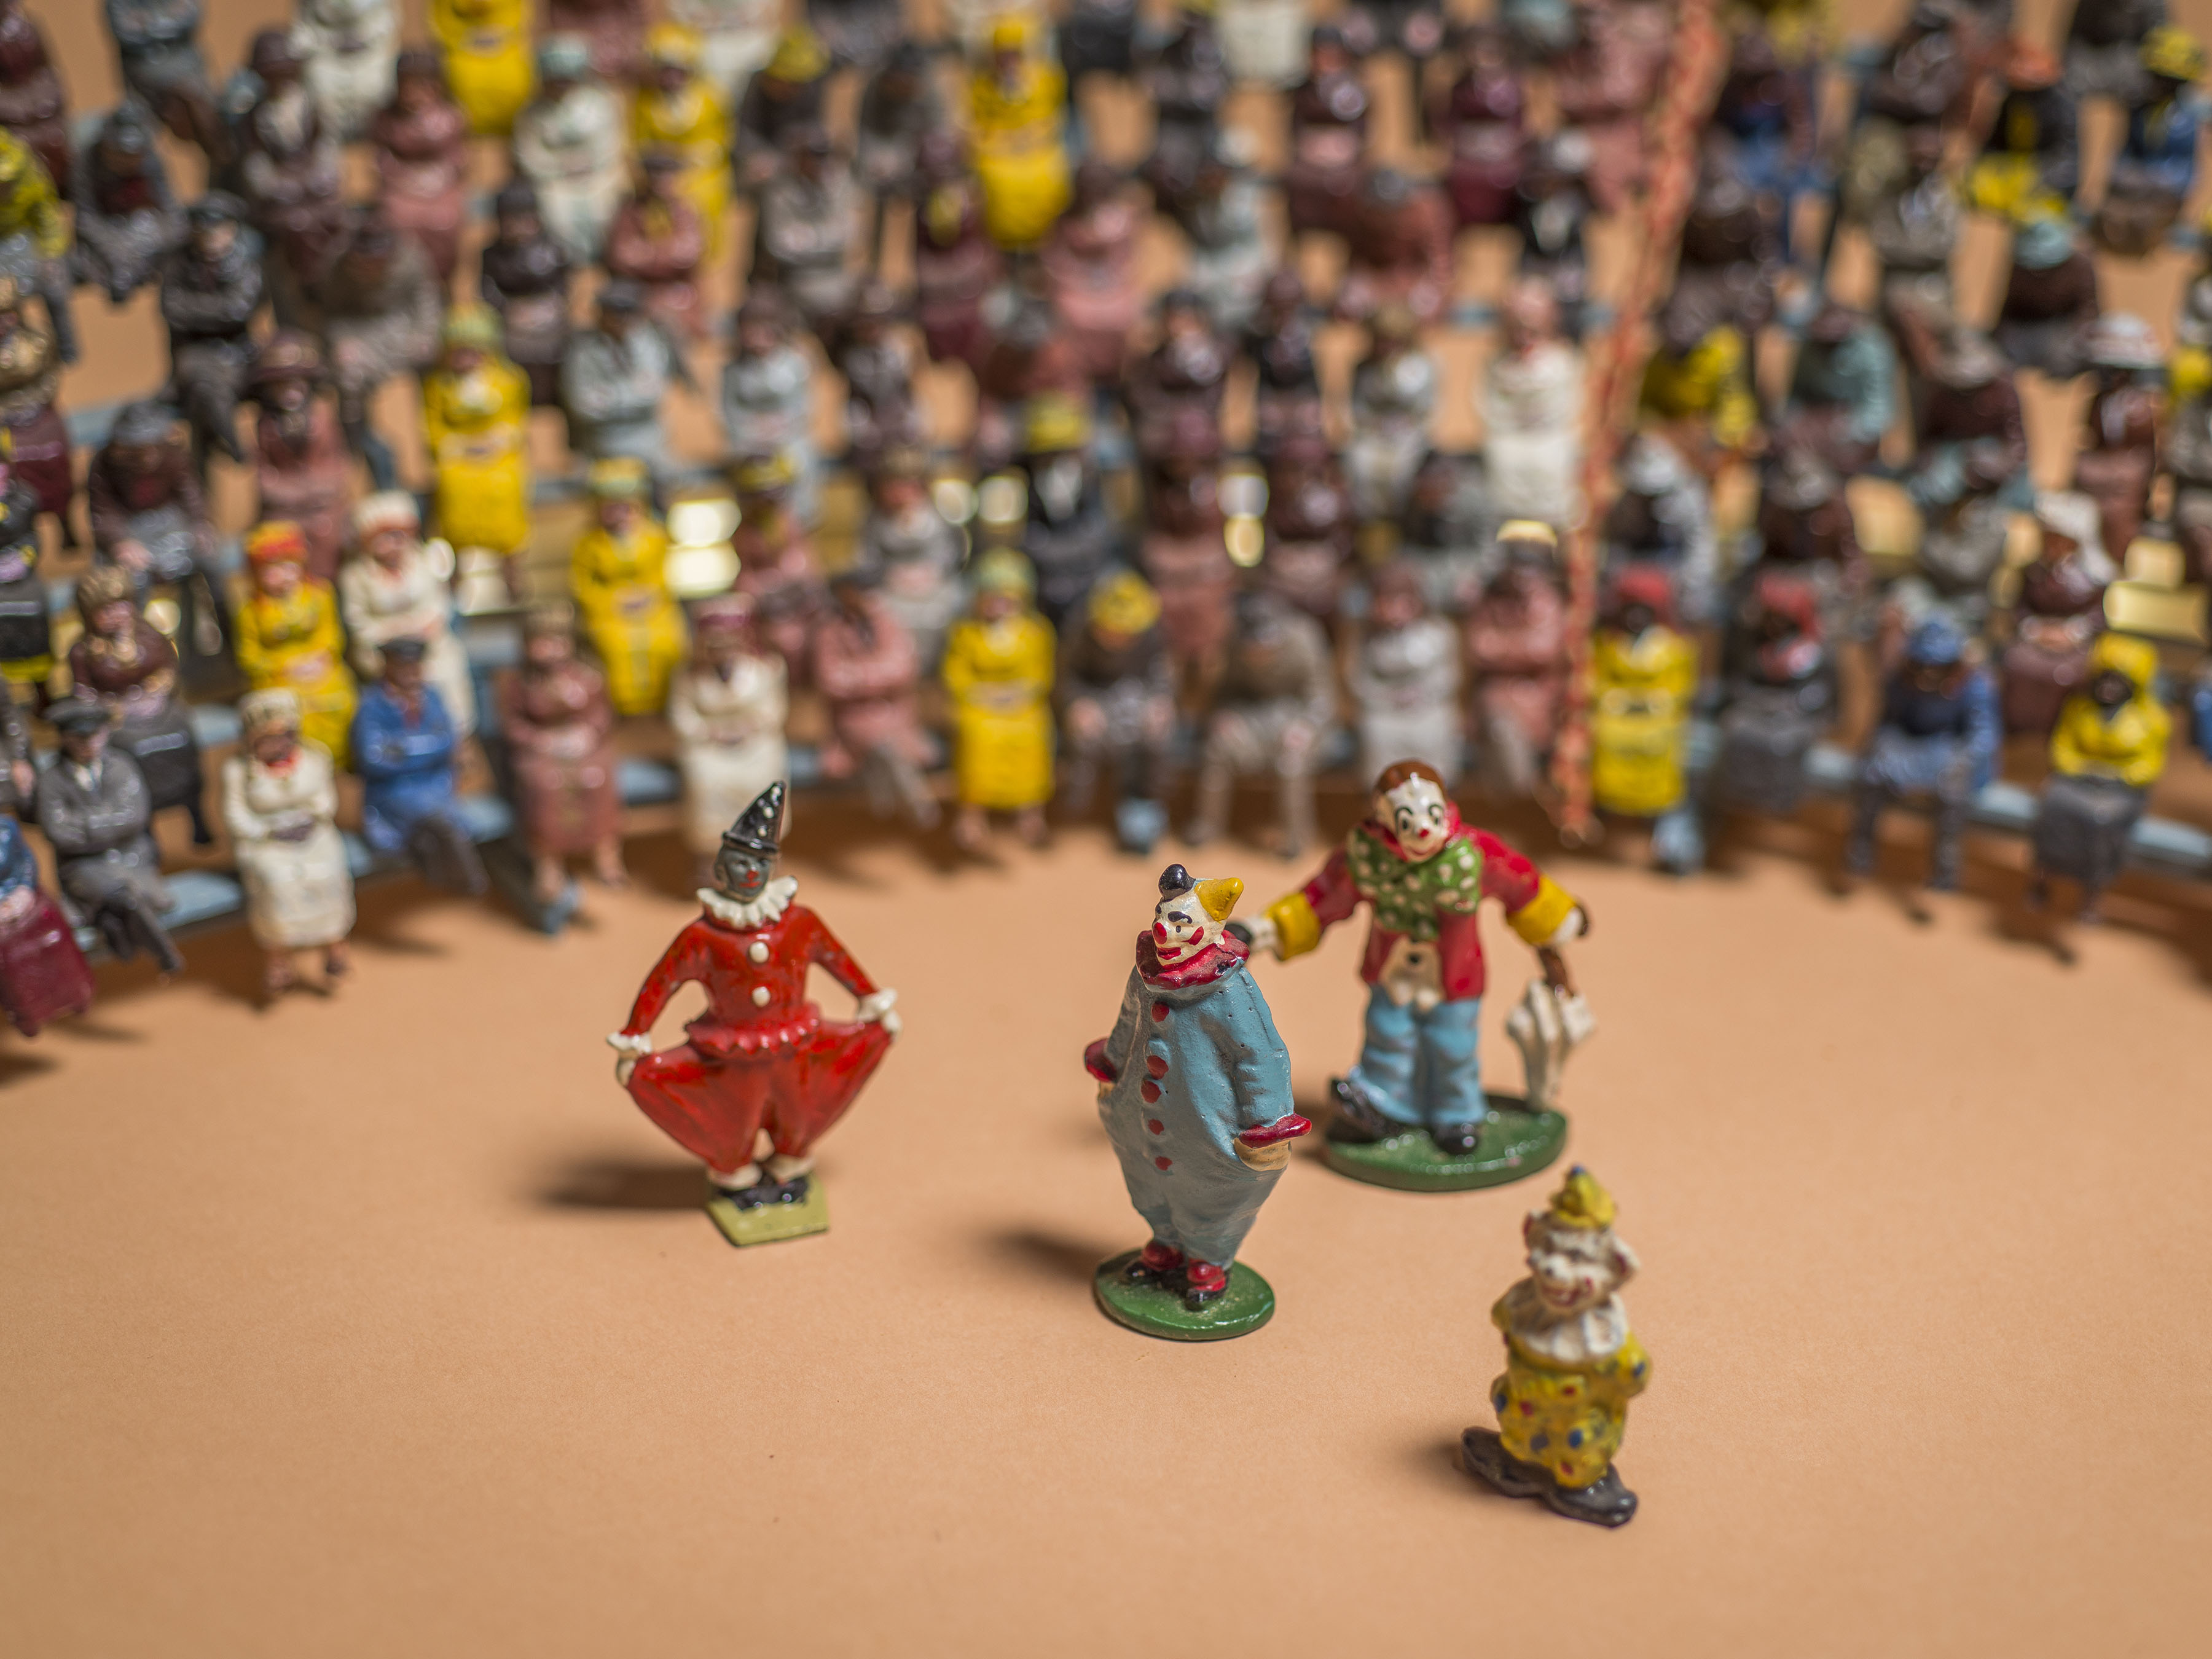 Celebrate the Opening of The Morris Miniature Circus